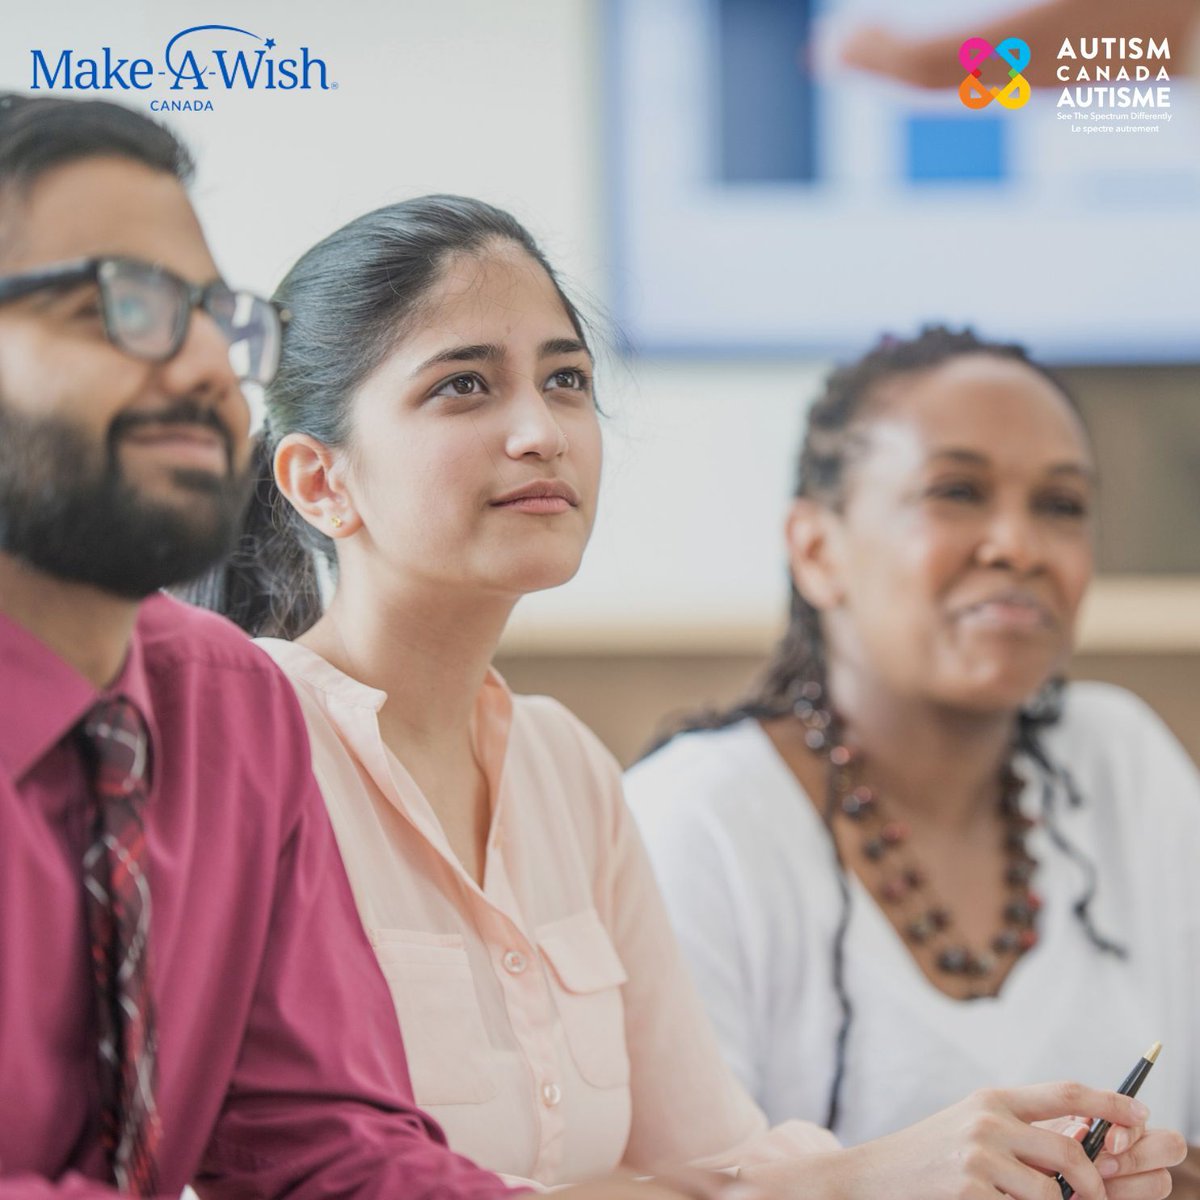 Make-A-Wish® Canada has partnered with Autism Canada to provide specialized training to Make-A-Wish staff so that they can effectively communicate with wish children who are non-speaking due to their critical illness. Read the full press release here: buff.ly/3TgHOEn